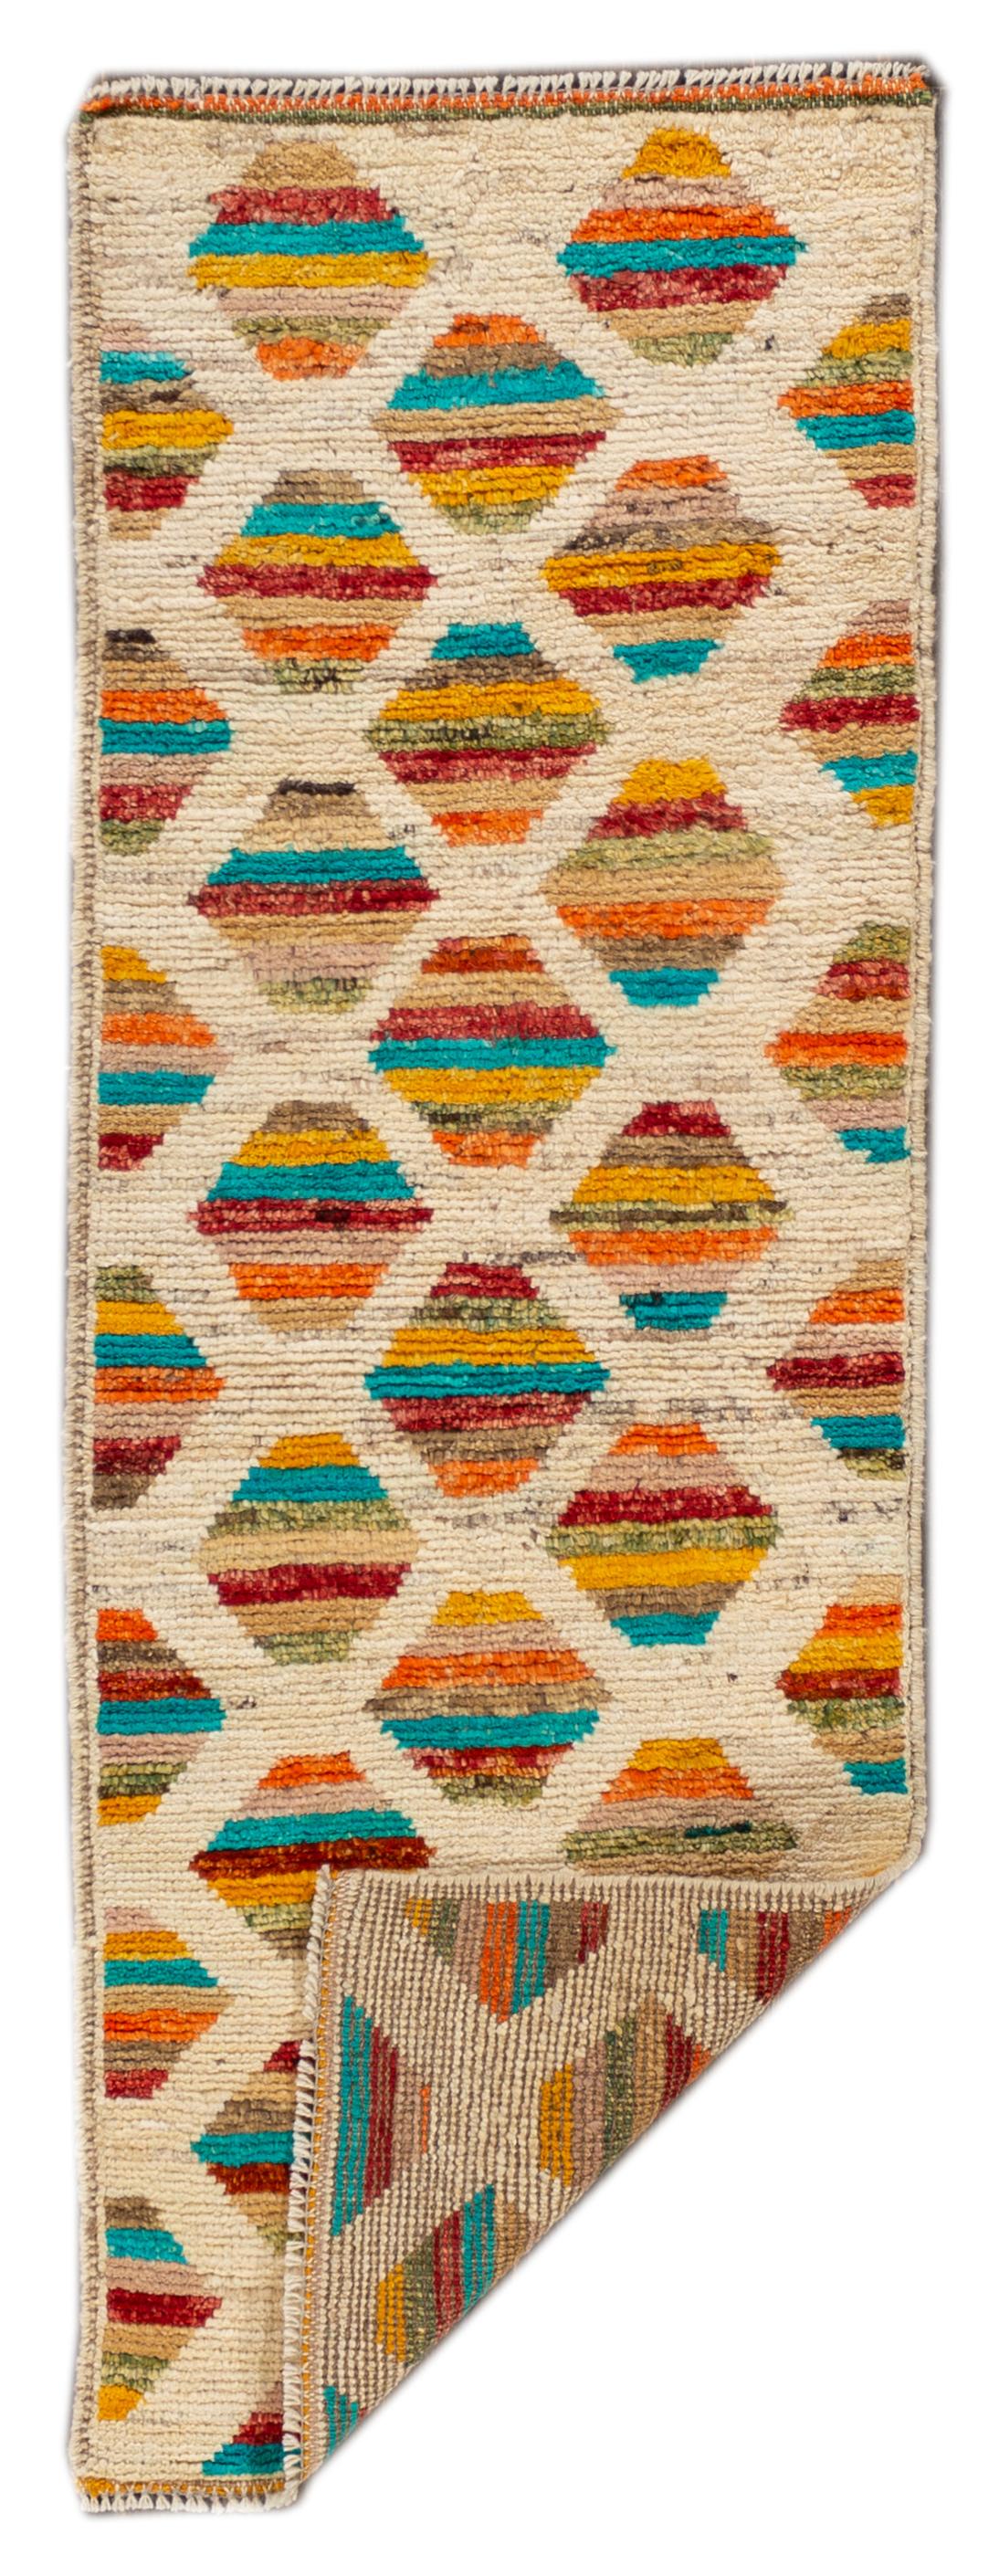 Beautiful contemporary Gabbeh style runner rug with an ivory field, multi-color accents in an all-over geometric pattern, circa 2018.
This rug measures 1' 9